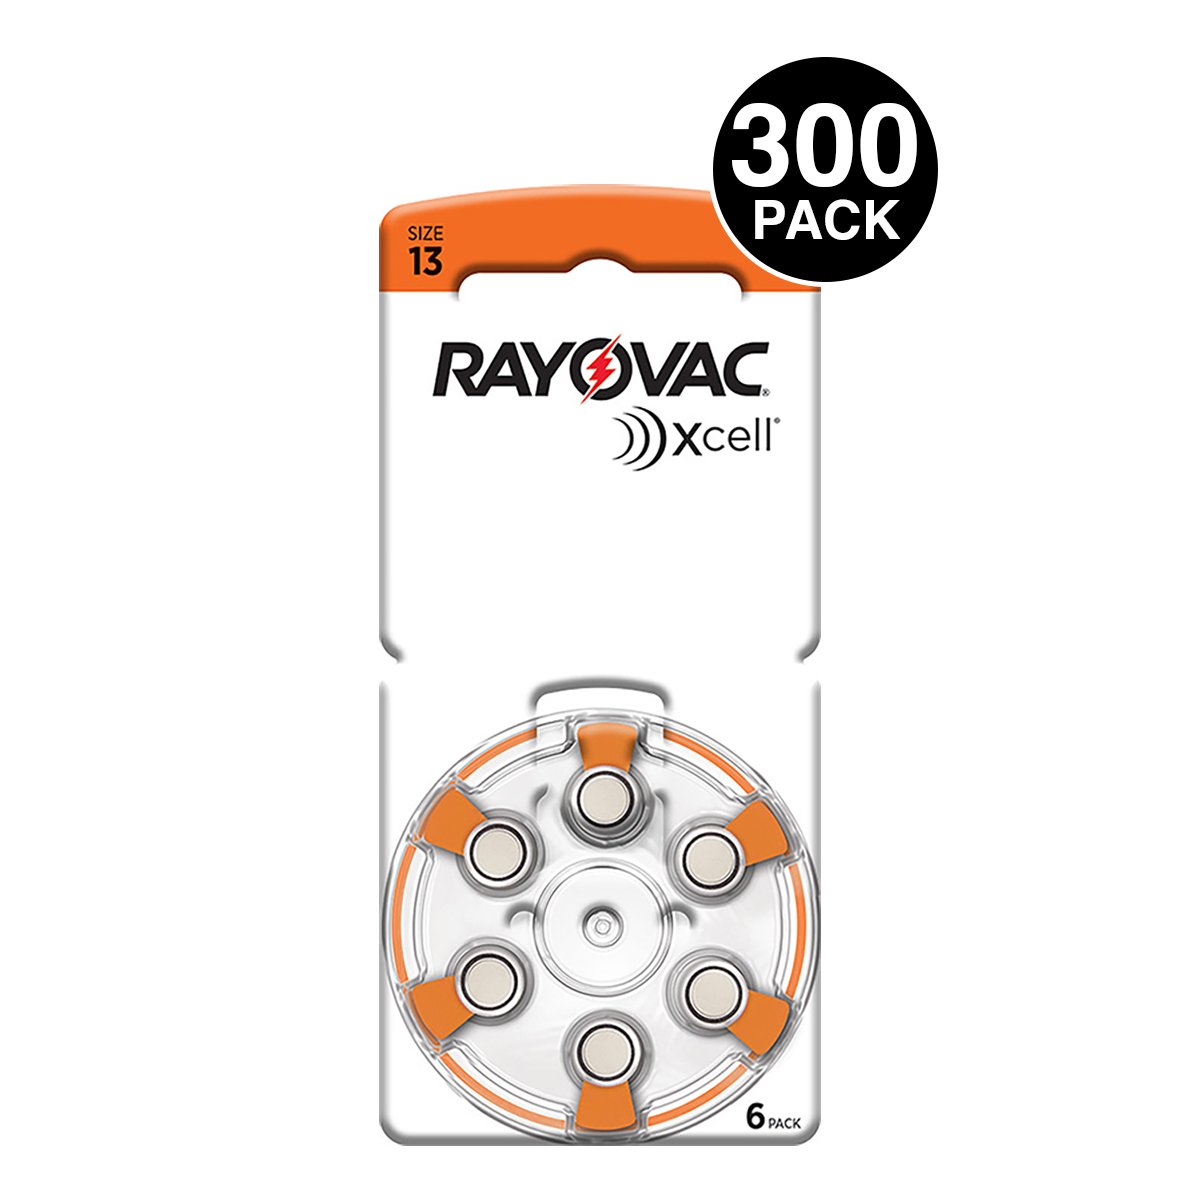 Xcell (Made By Rayovac) Size 13 Hearing Aid Batteries (300 pcs)